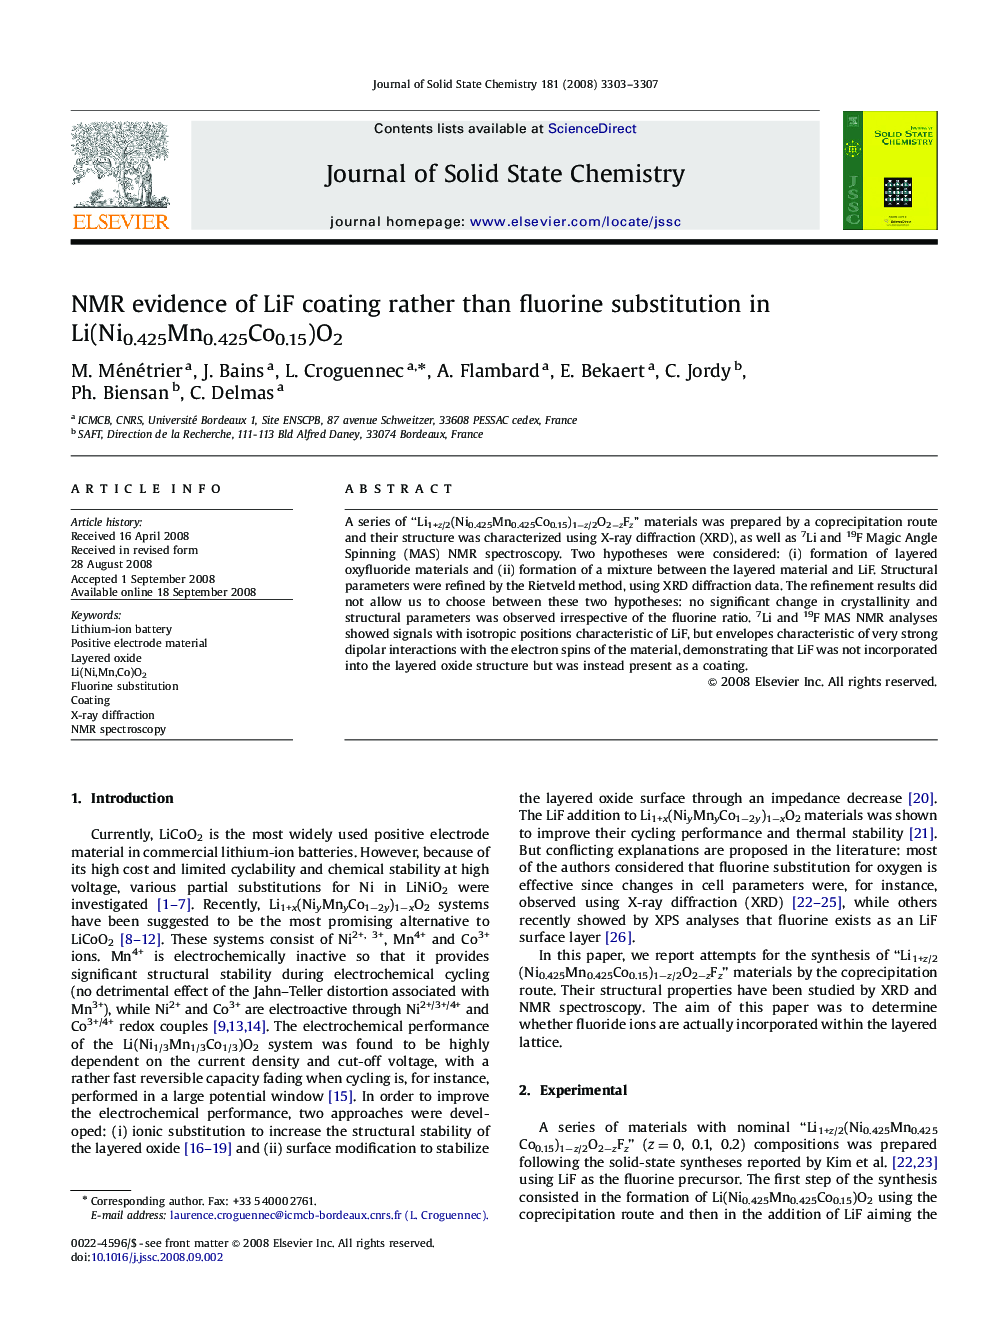 NMR evidence of LiF coating rather than fluorine substitution in Li(Ni0.425Mn0.425Co0.15)O2